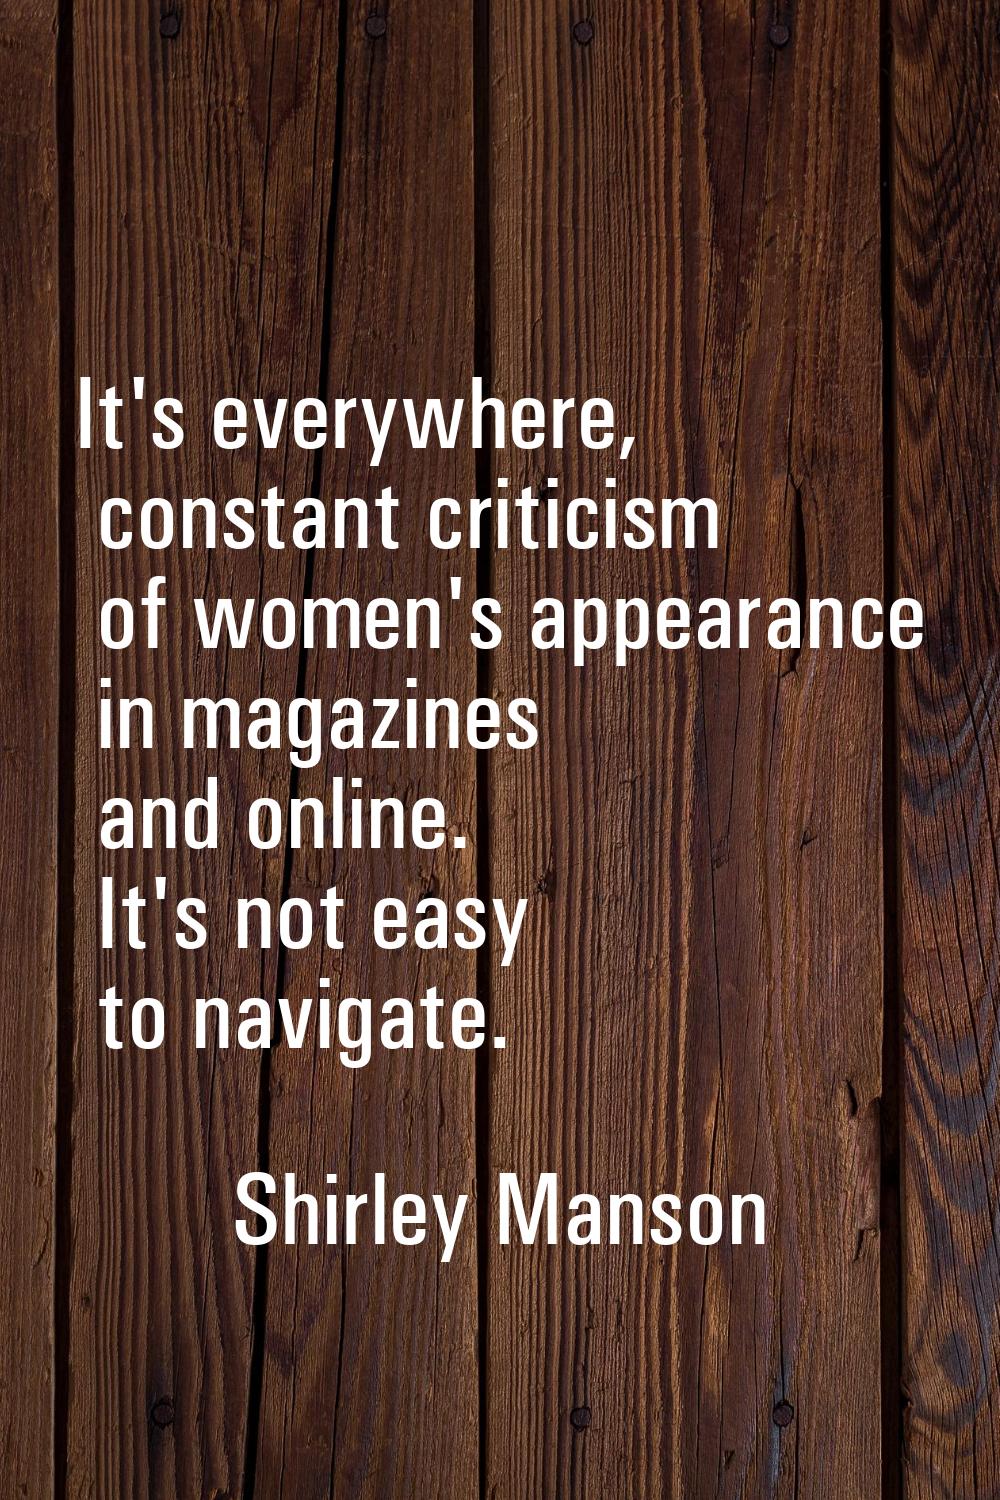 It's everywhere, constant criticism of women's appearance in magazines and online. It's not easy to